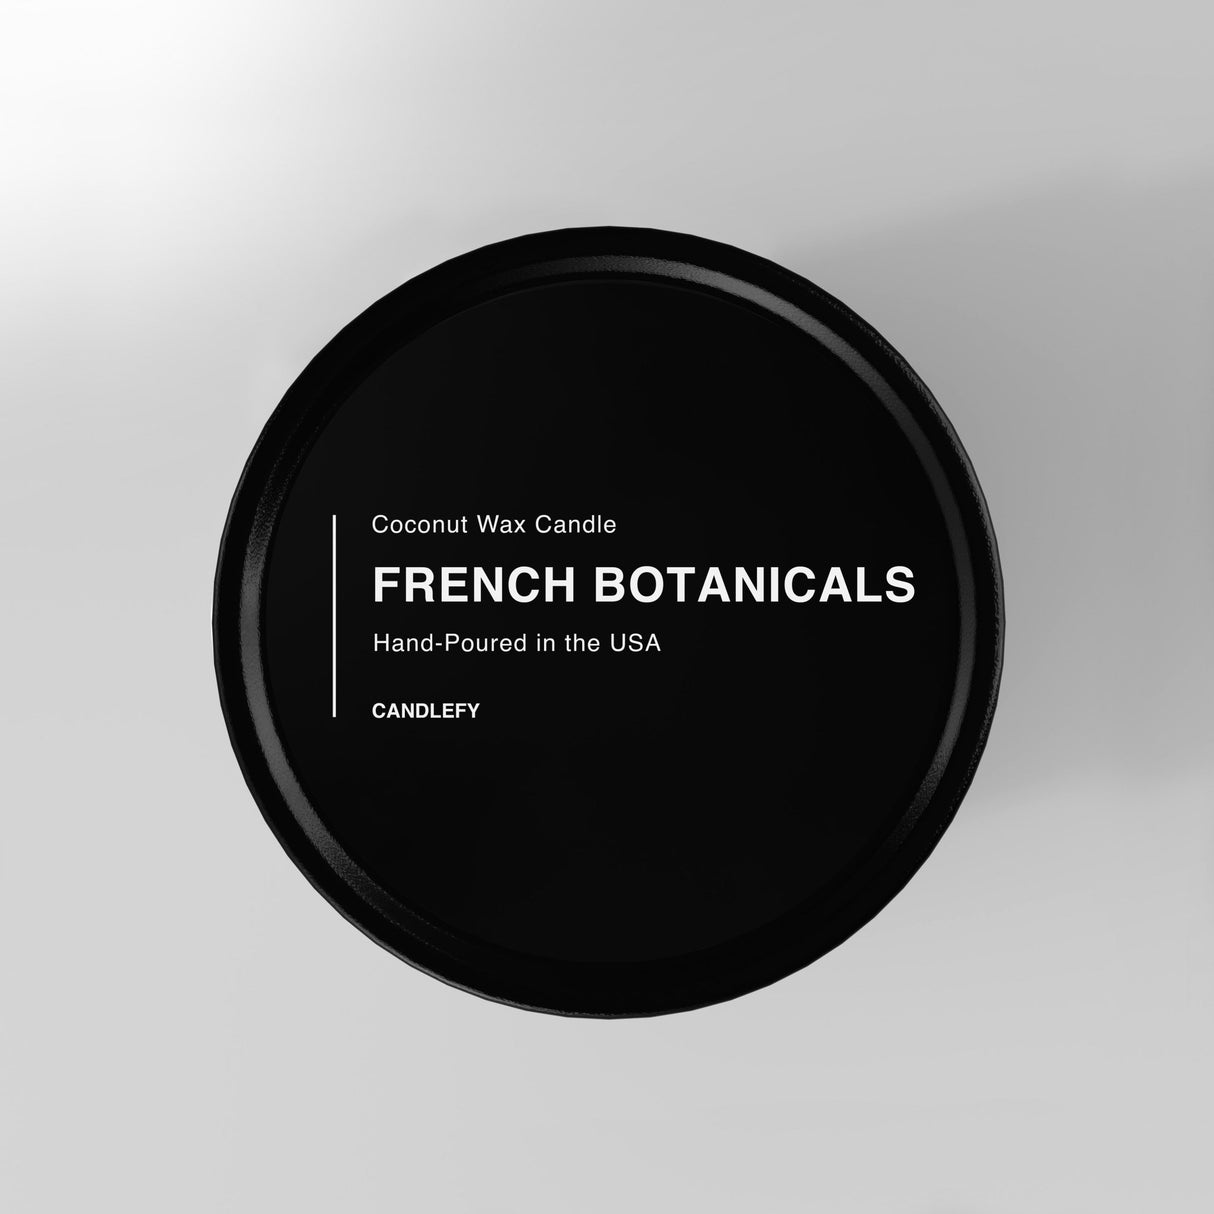 French Botanicals Natural Wax Scented Candle in Black Travel Tin - Candlefy